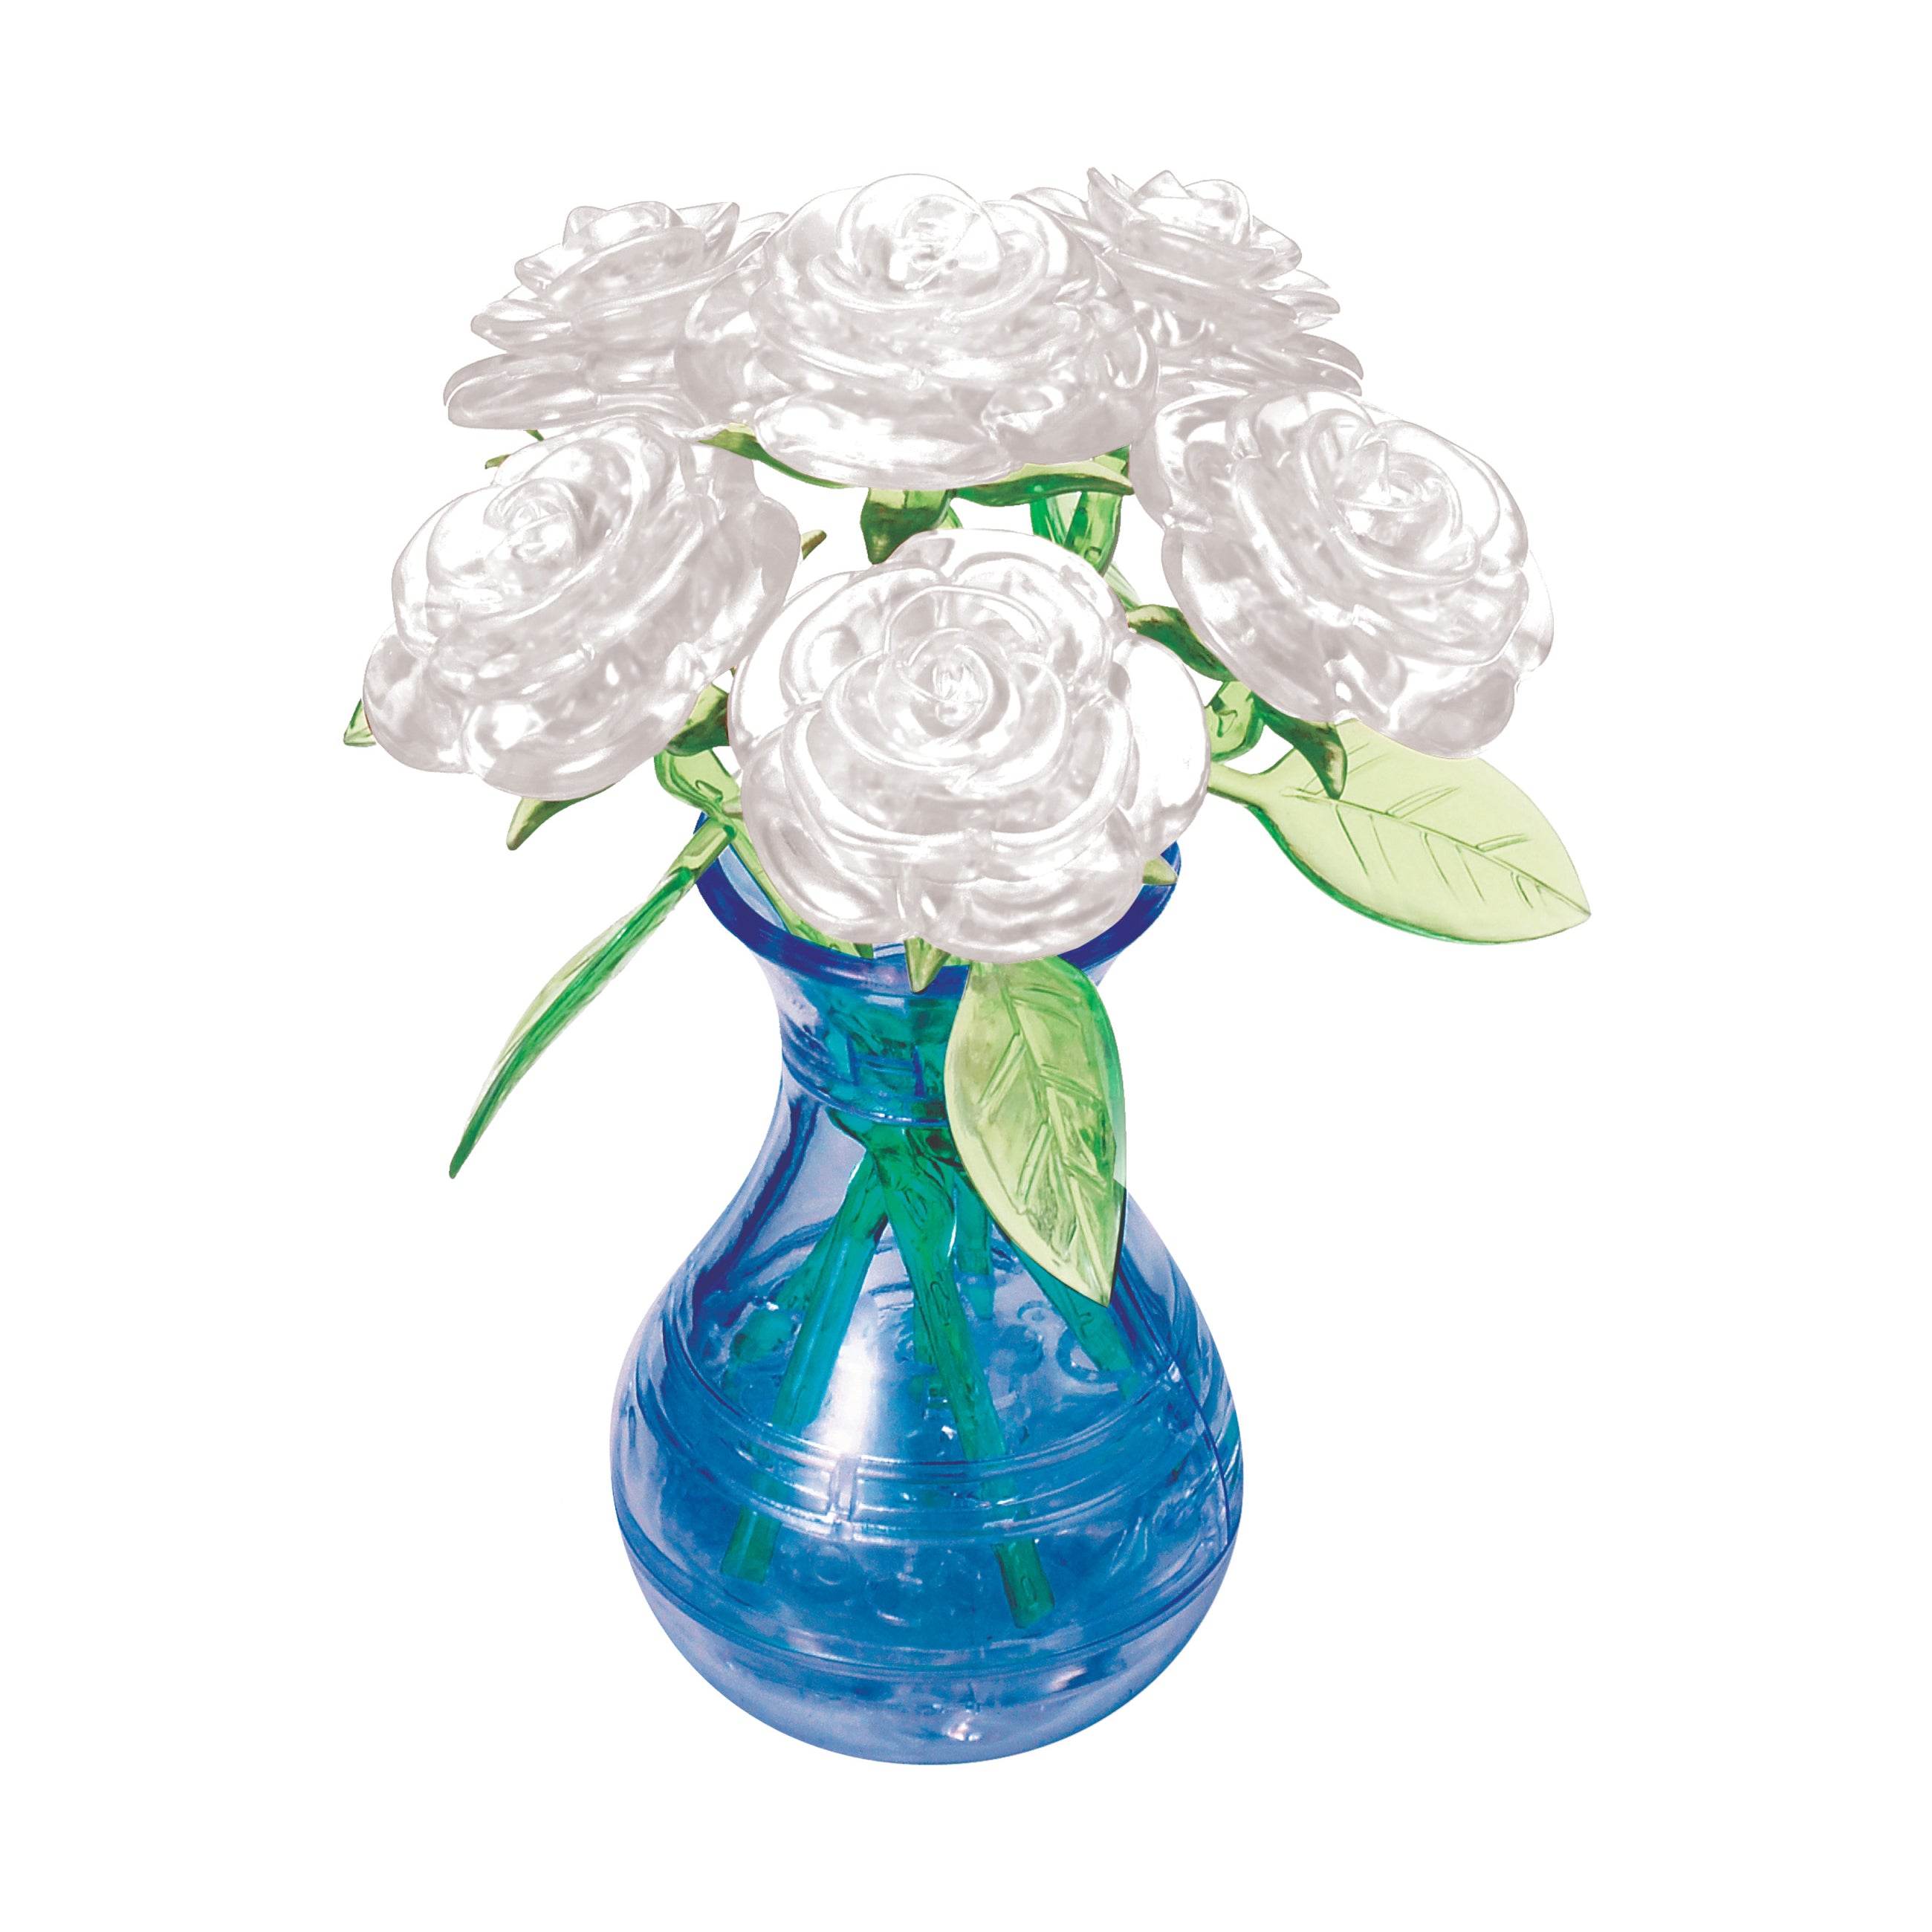 3D Crystal Puzzle - Roses in a Vase (White): 47 Pcs